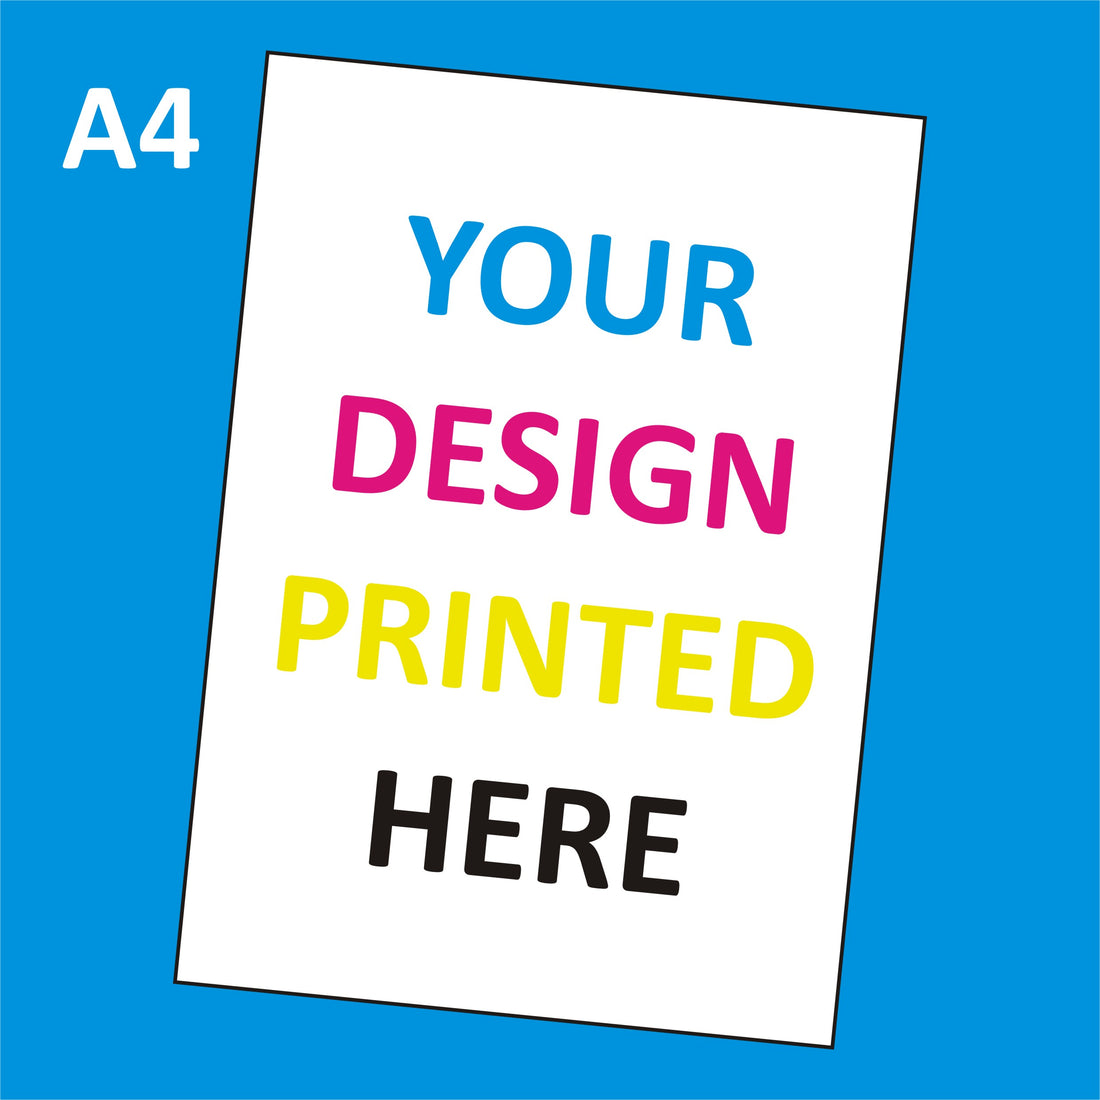 New Product - A4 Prints!